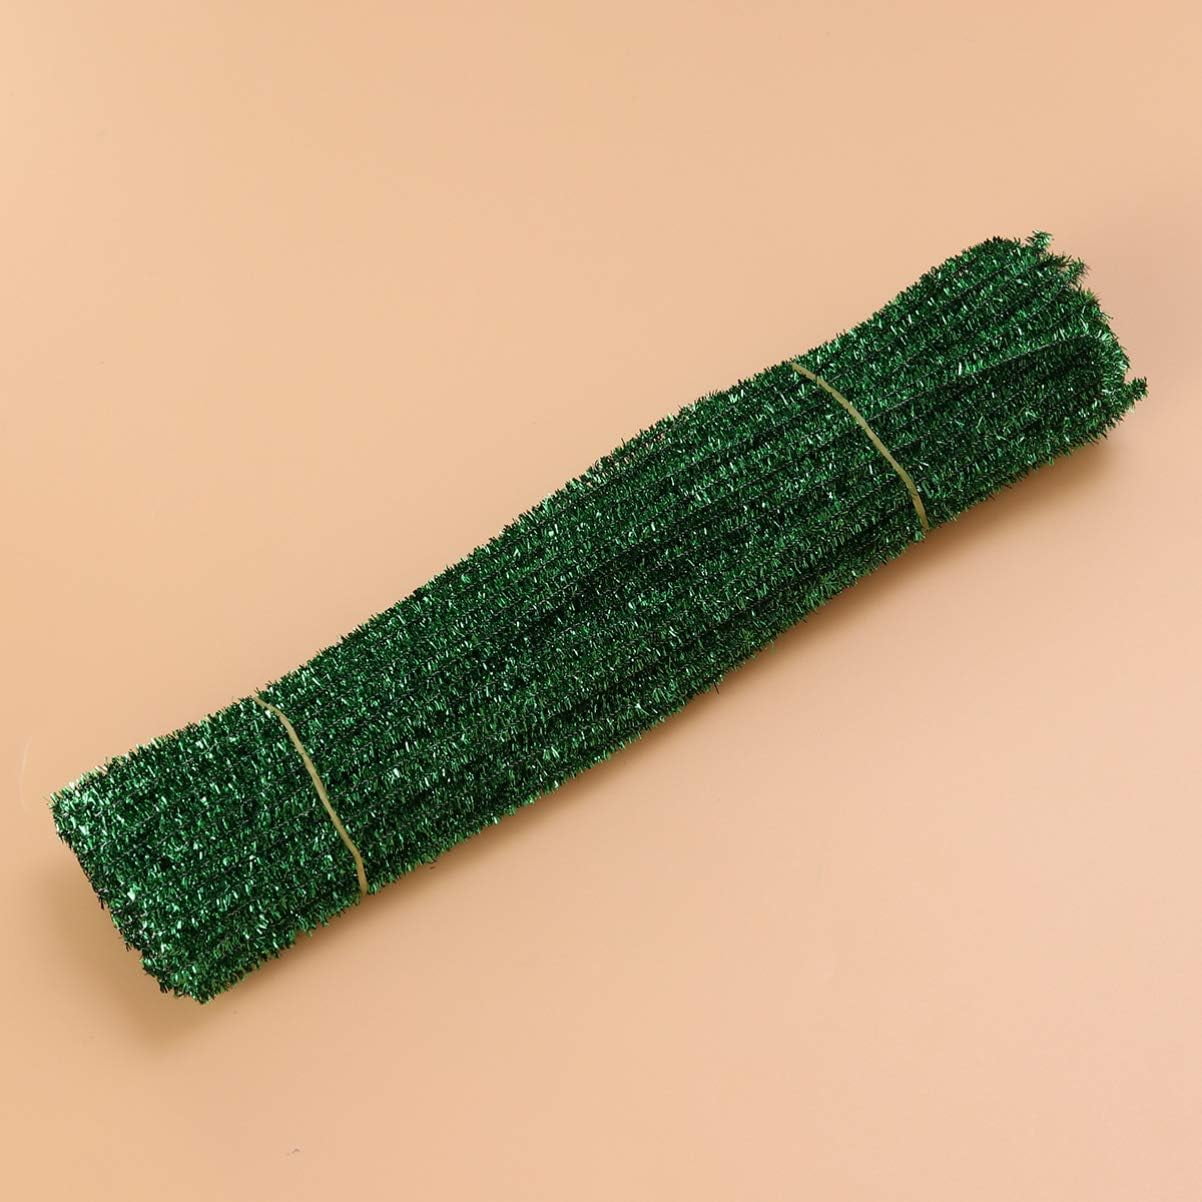 100pcs Colorful Chenille Stems Diy Material For Flower, Christmas Tree Pin,  Twisty Pipe Cleaners, Plush Iron Wire & Fuzzy Bar